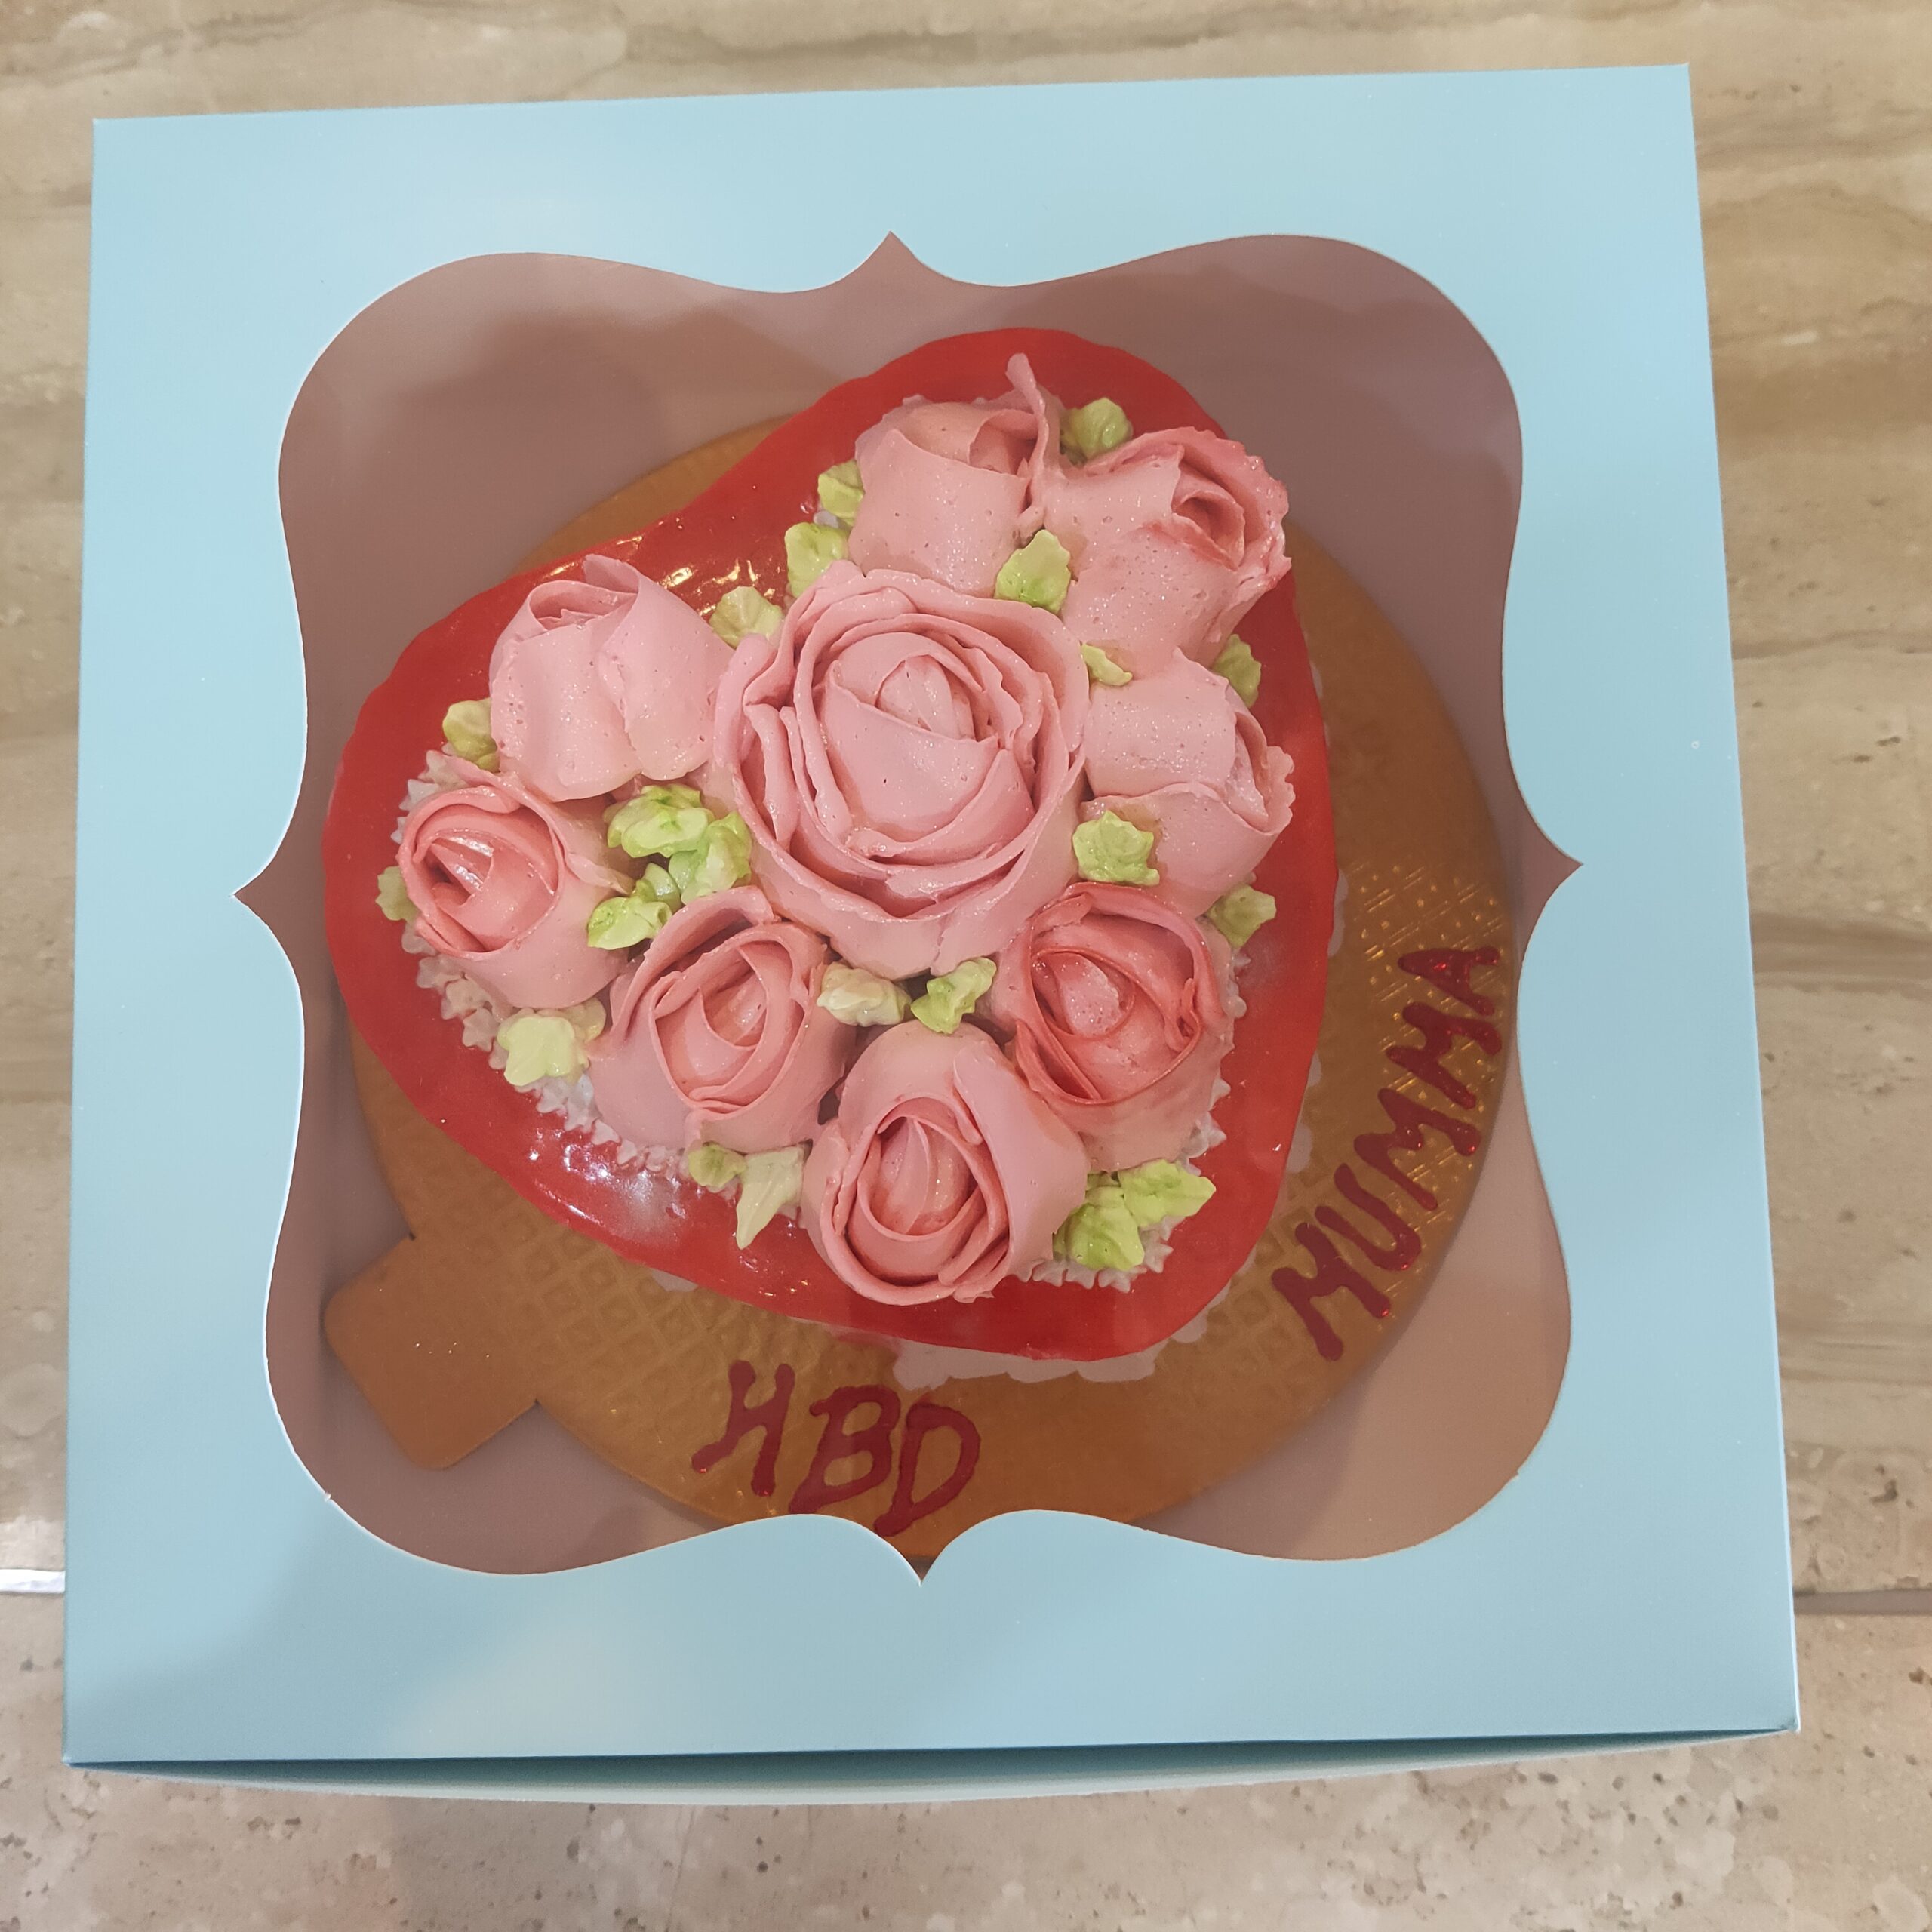 Delicious Heart Shaped Anniversary Chocolate Cake Half Kg